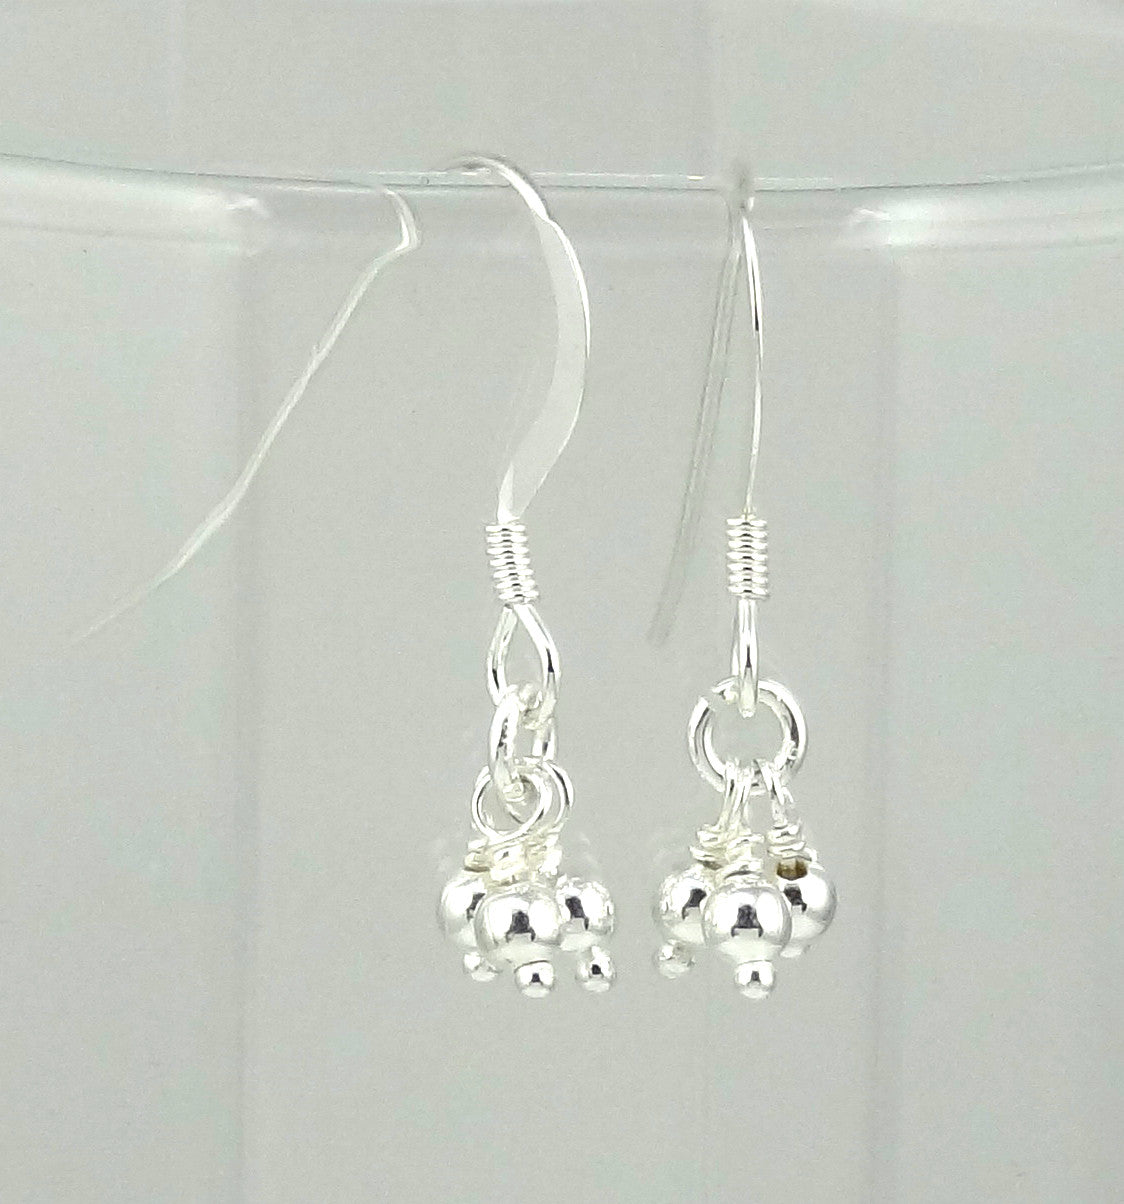 Sterling Silver Simple Tiny Drops Earrings